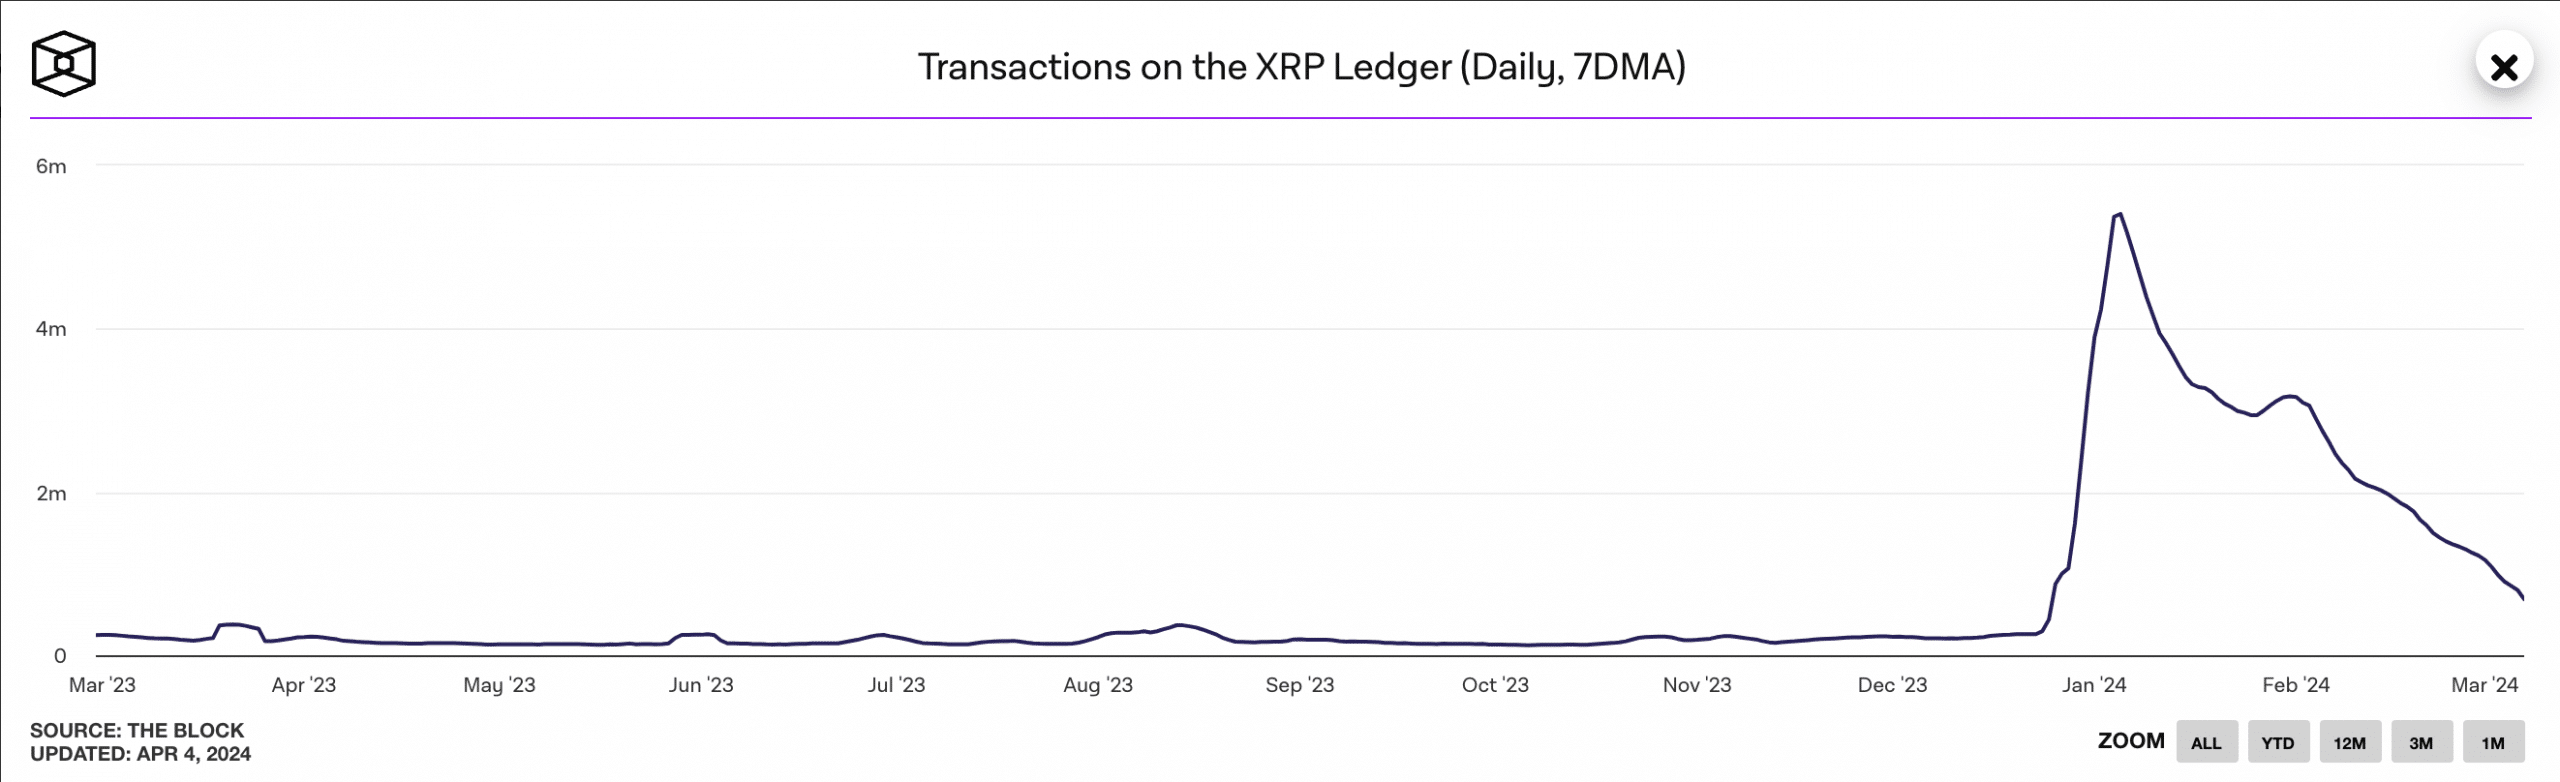 XRPL Transactions Count